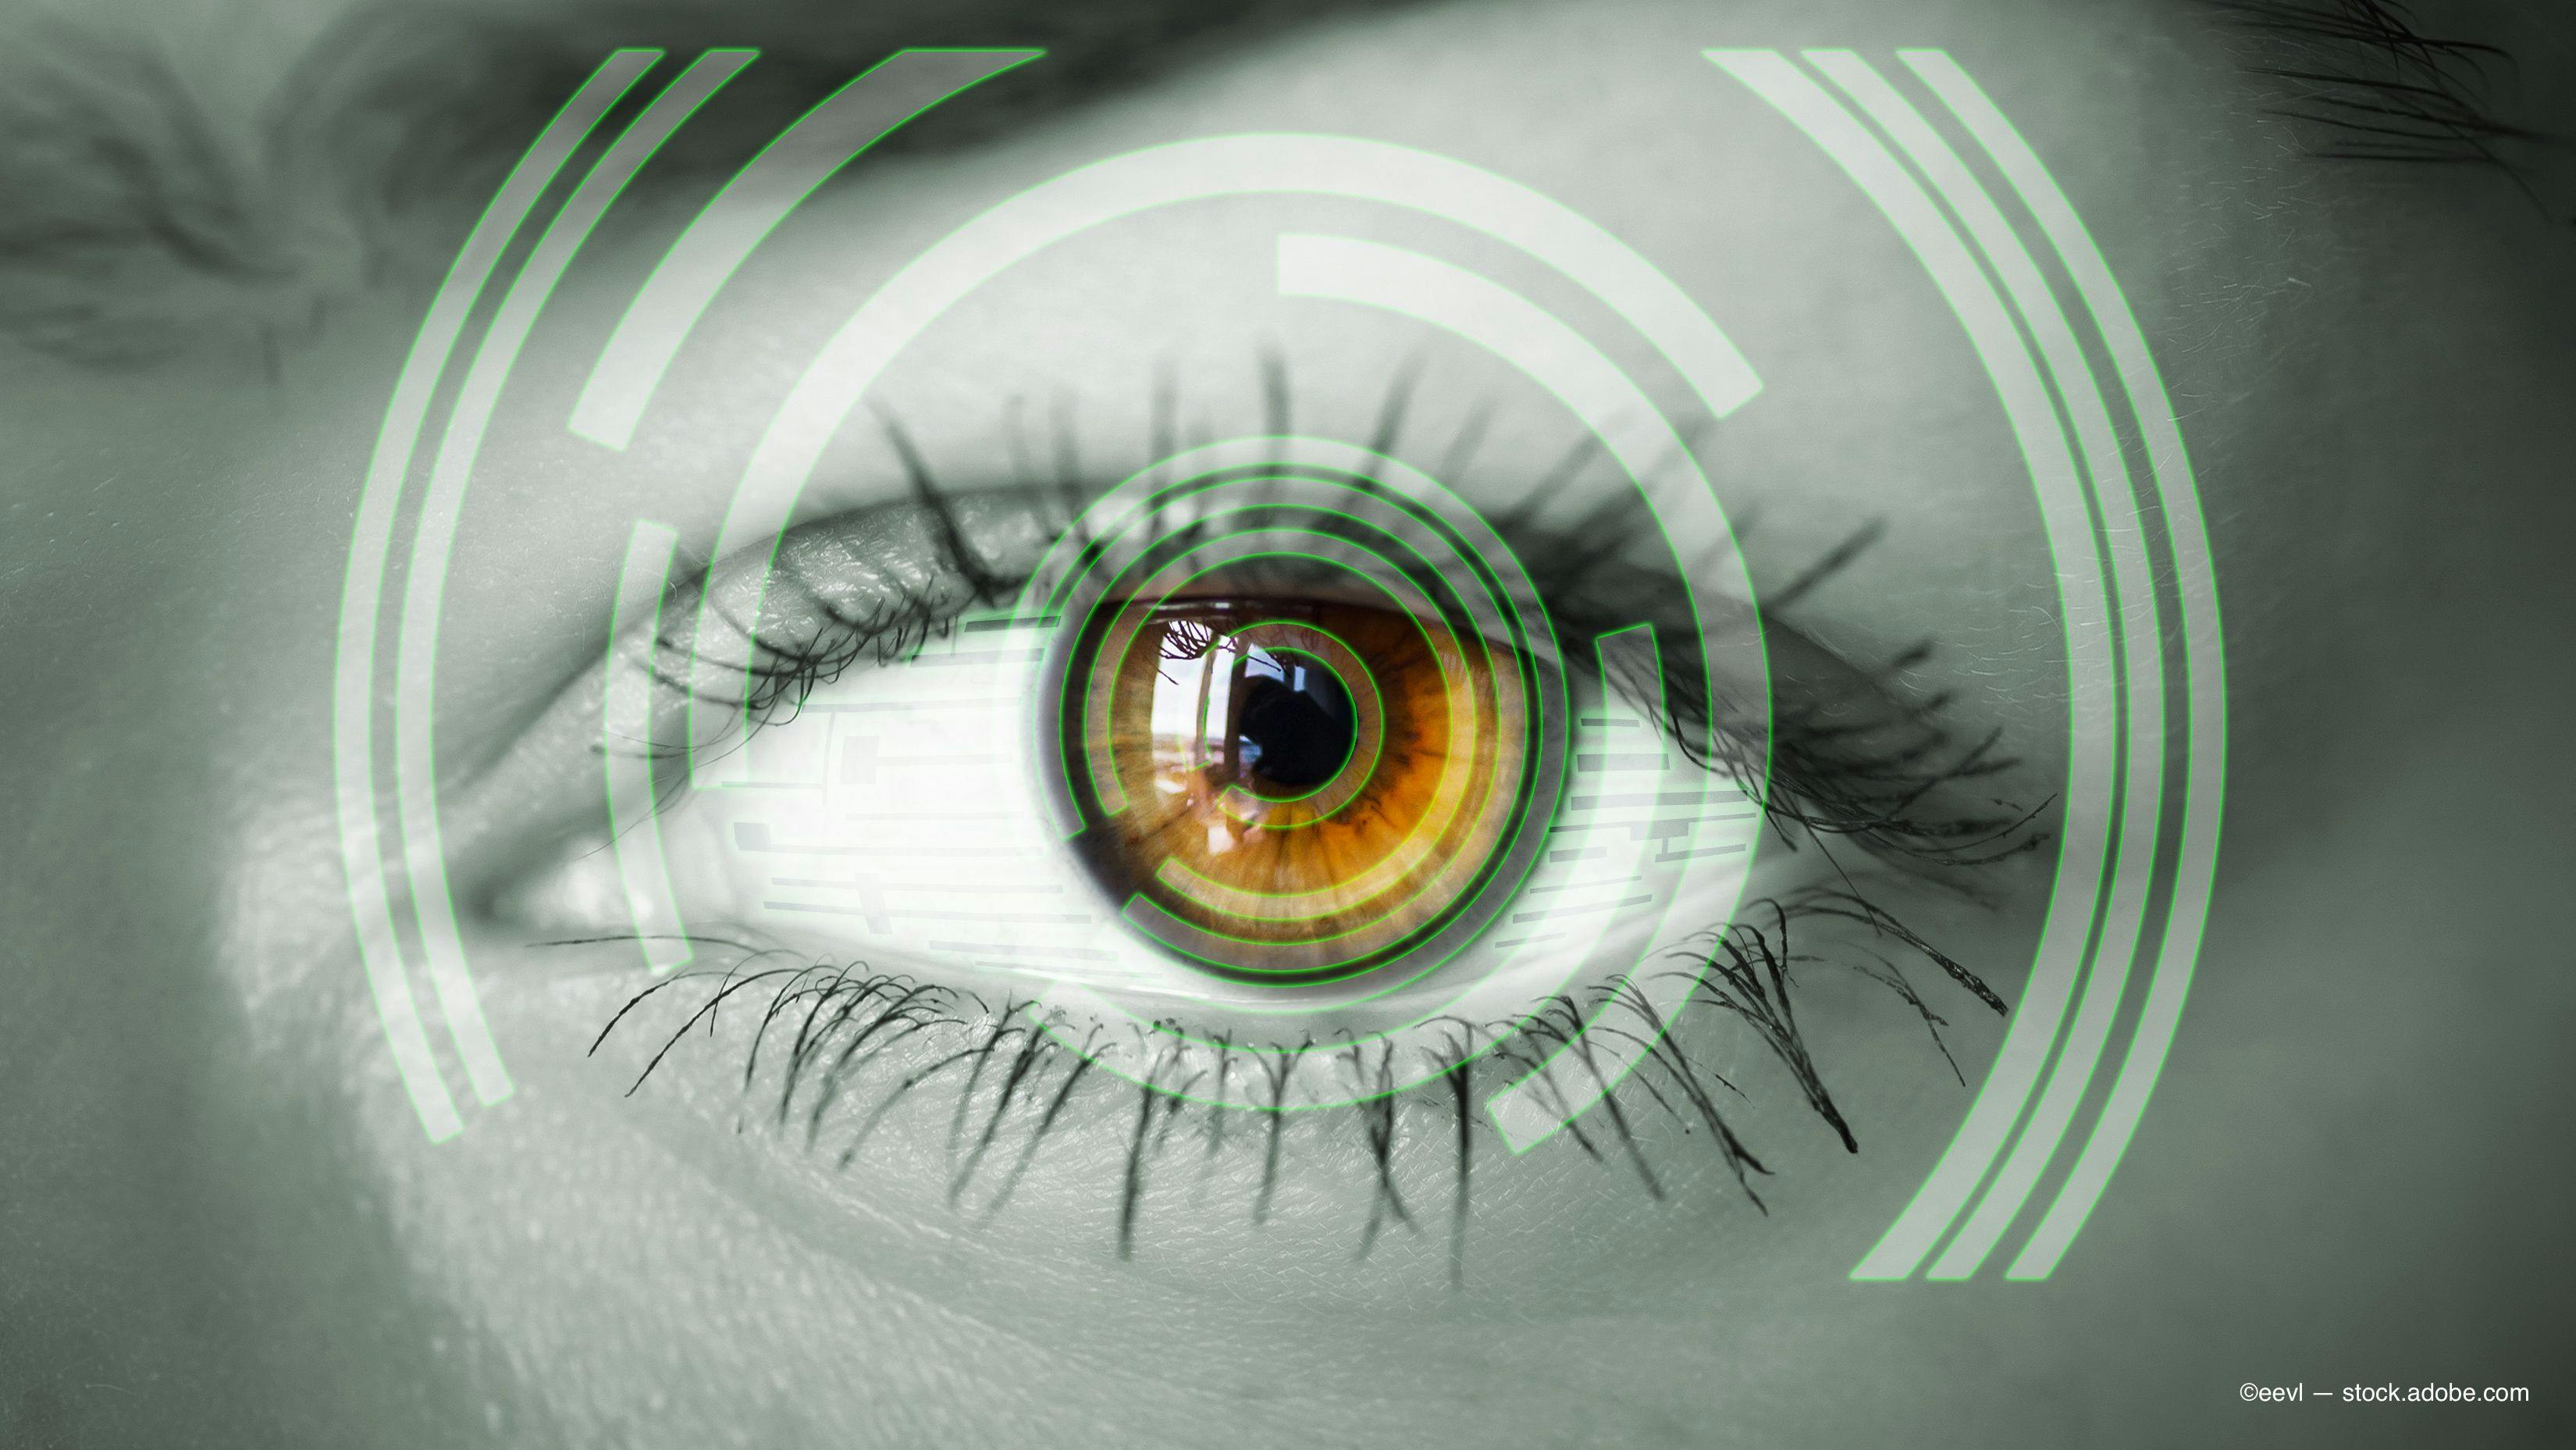 Software plugin allows retina specialists to prepare, guide navigated laser treatment remotely